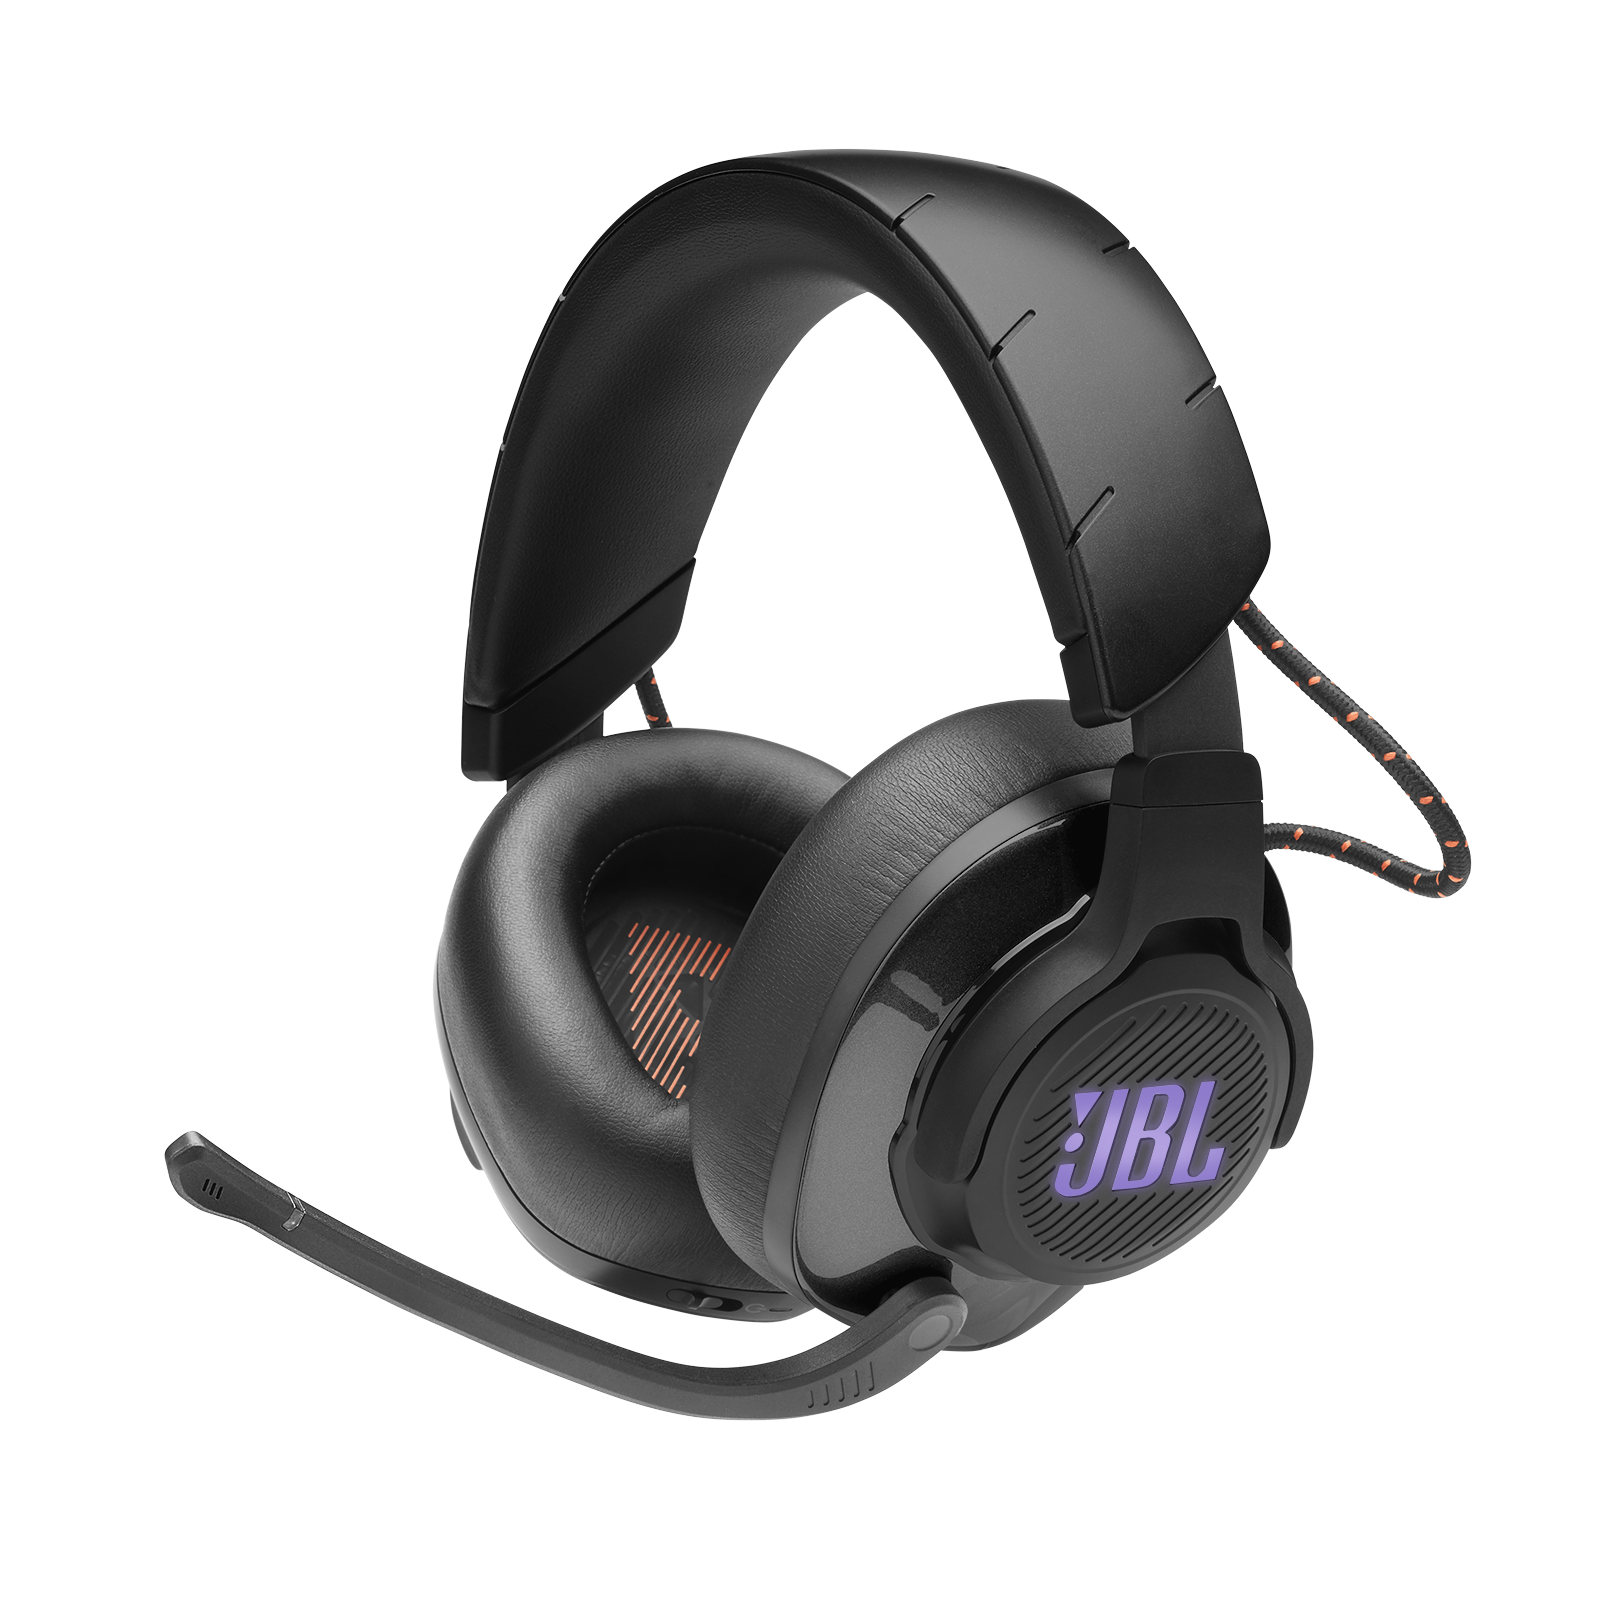 JBL Quantum 600 - Black - Wireless over-ear performance PC gaming headset with surround sound and game-chat balance dial - Detailshot 3